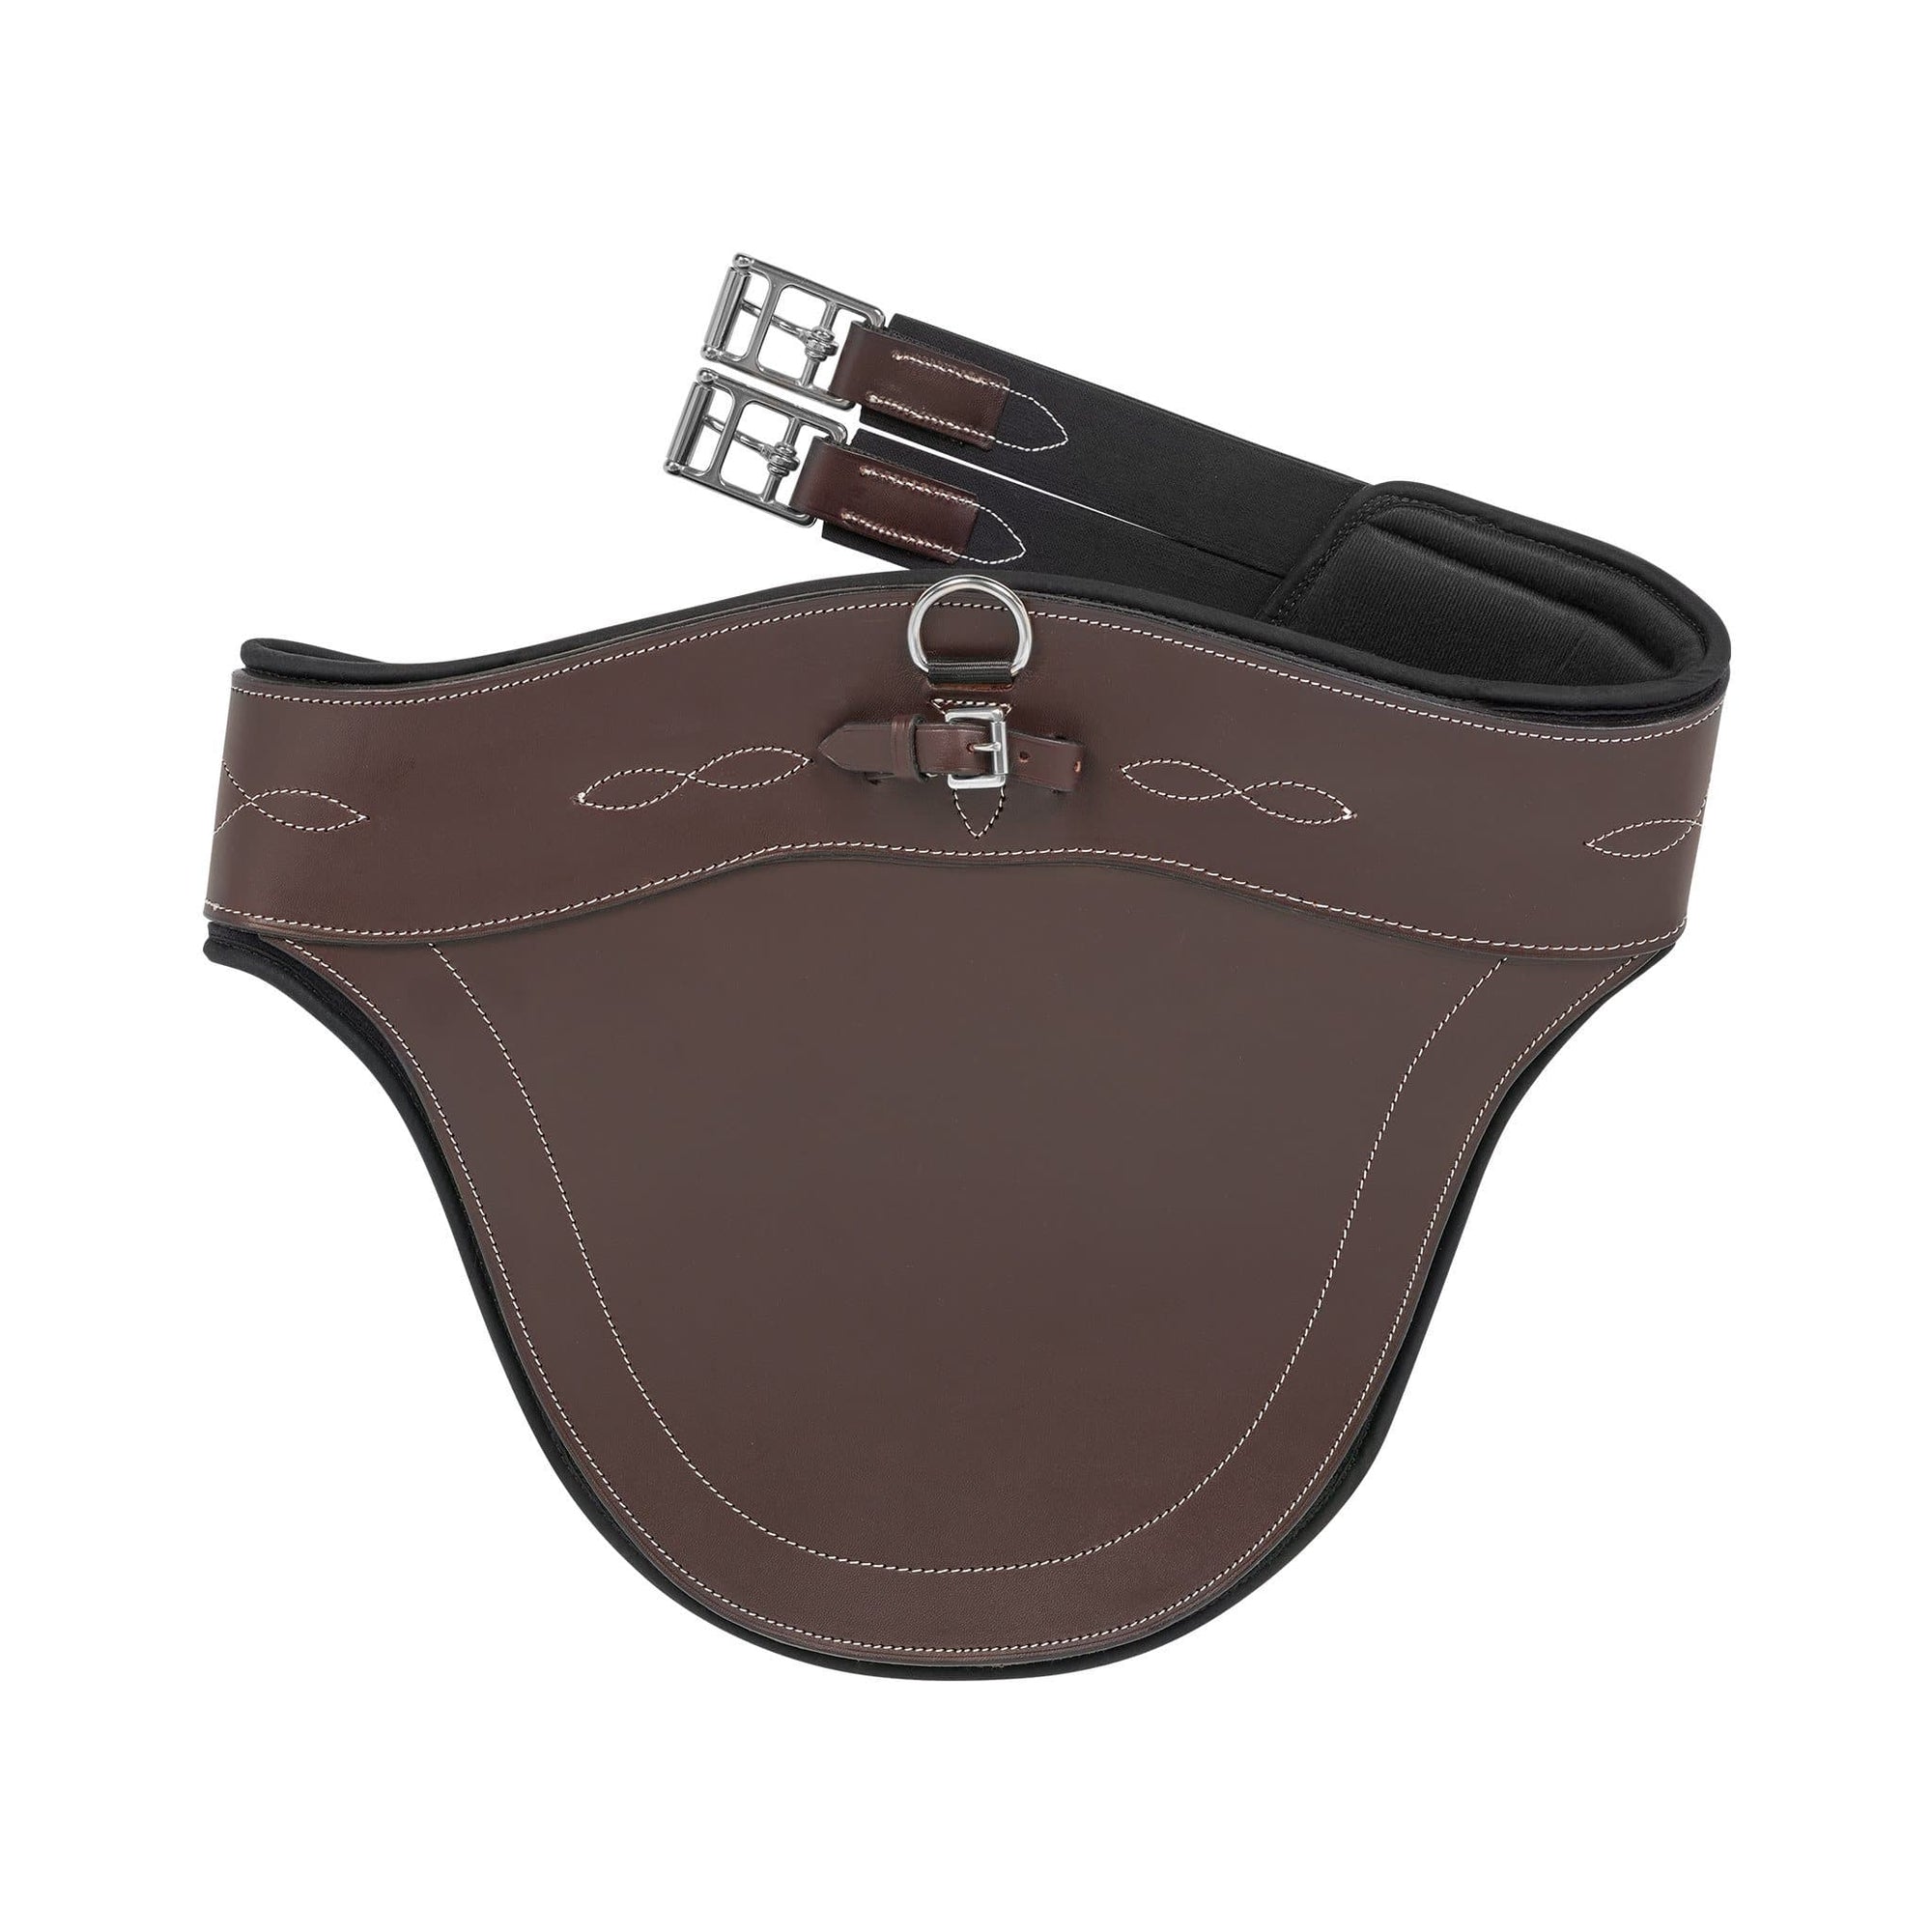 The Anatomical BellyGuard is designed to provide a superior fit with greater freedom of movement, making it the most comfortable girth on the market.